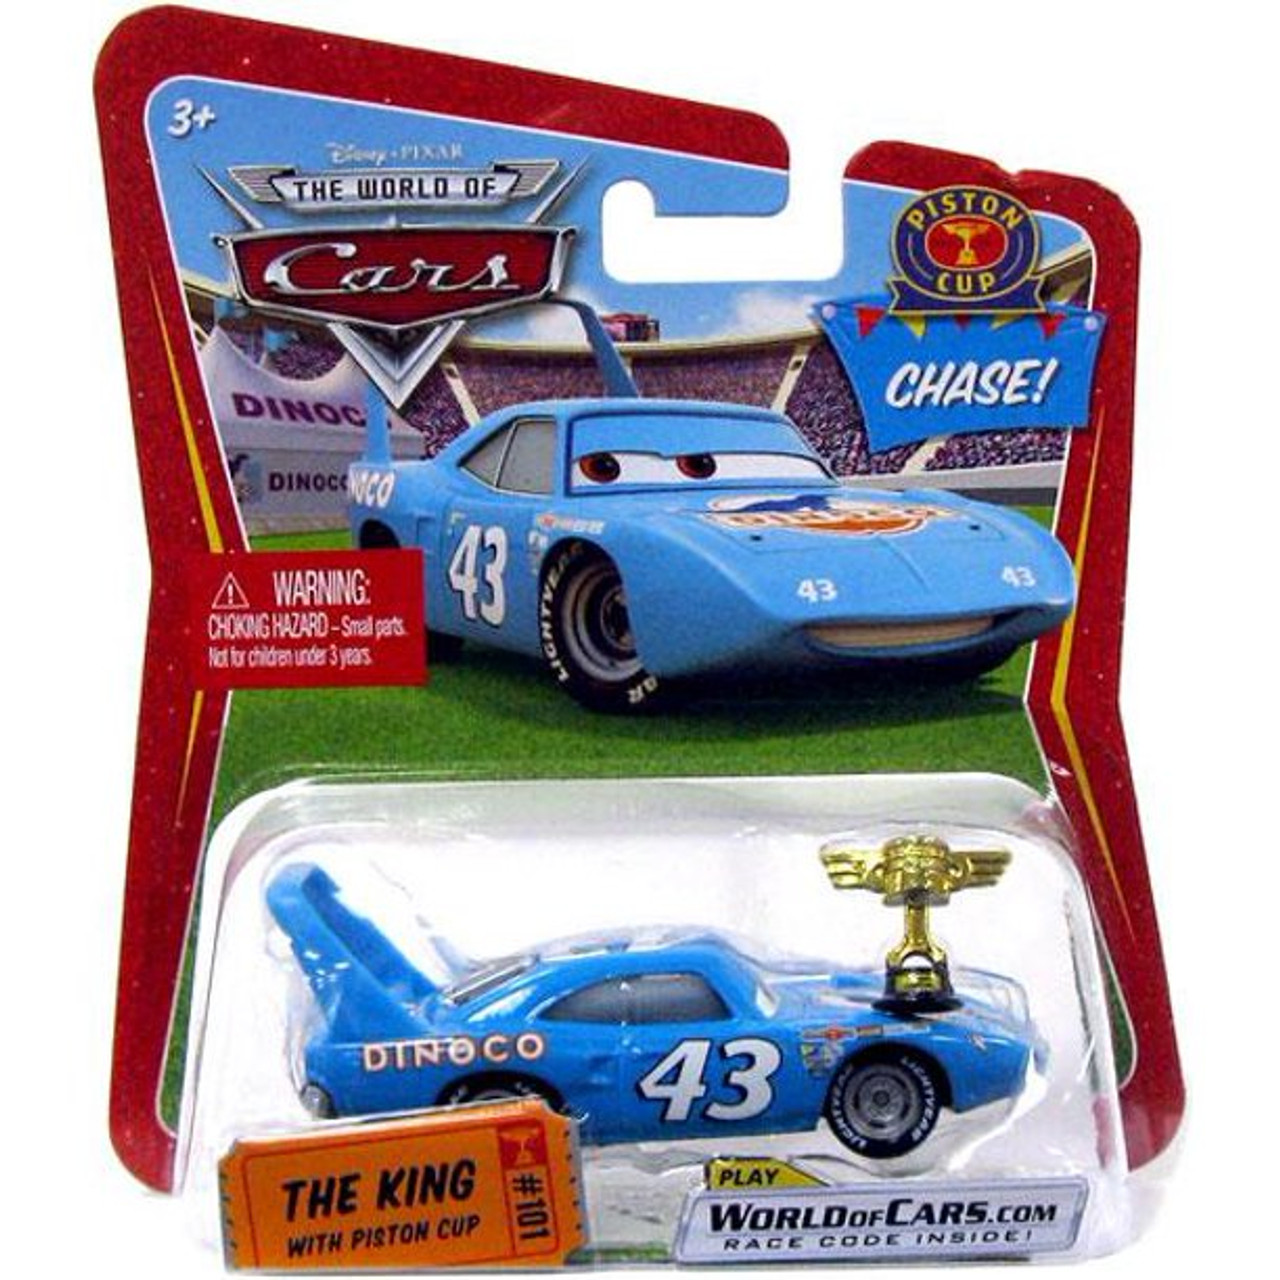 Disney Pixar The World of CARS Chase! The King with Piston Cup Diecast  Vehicle